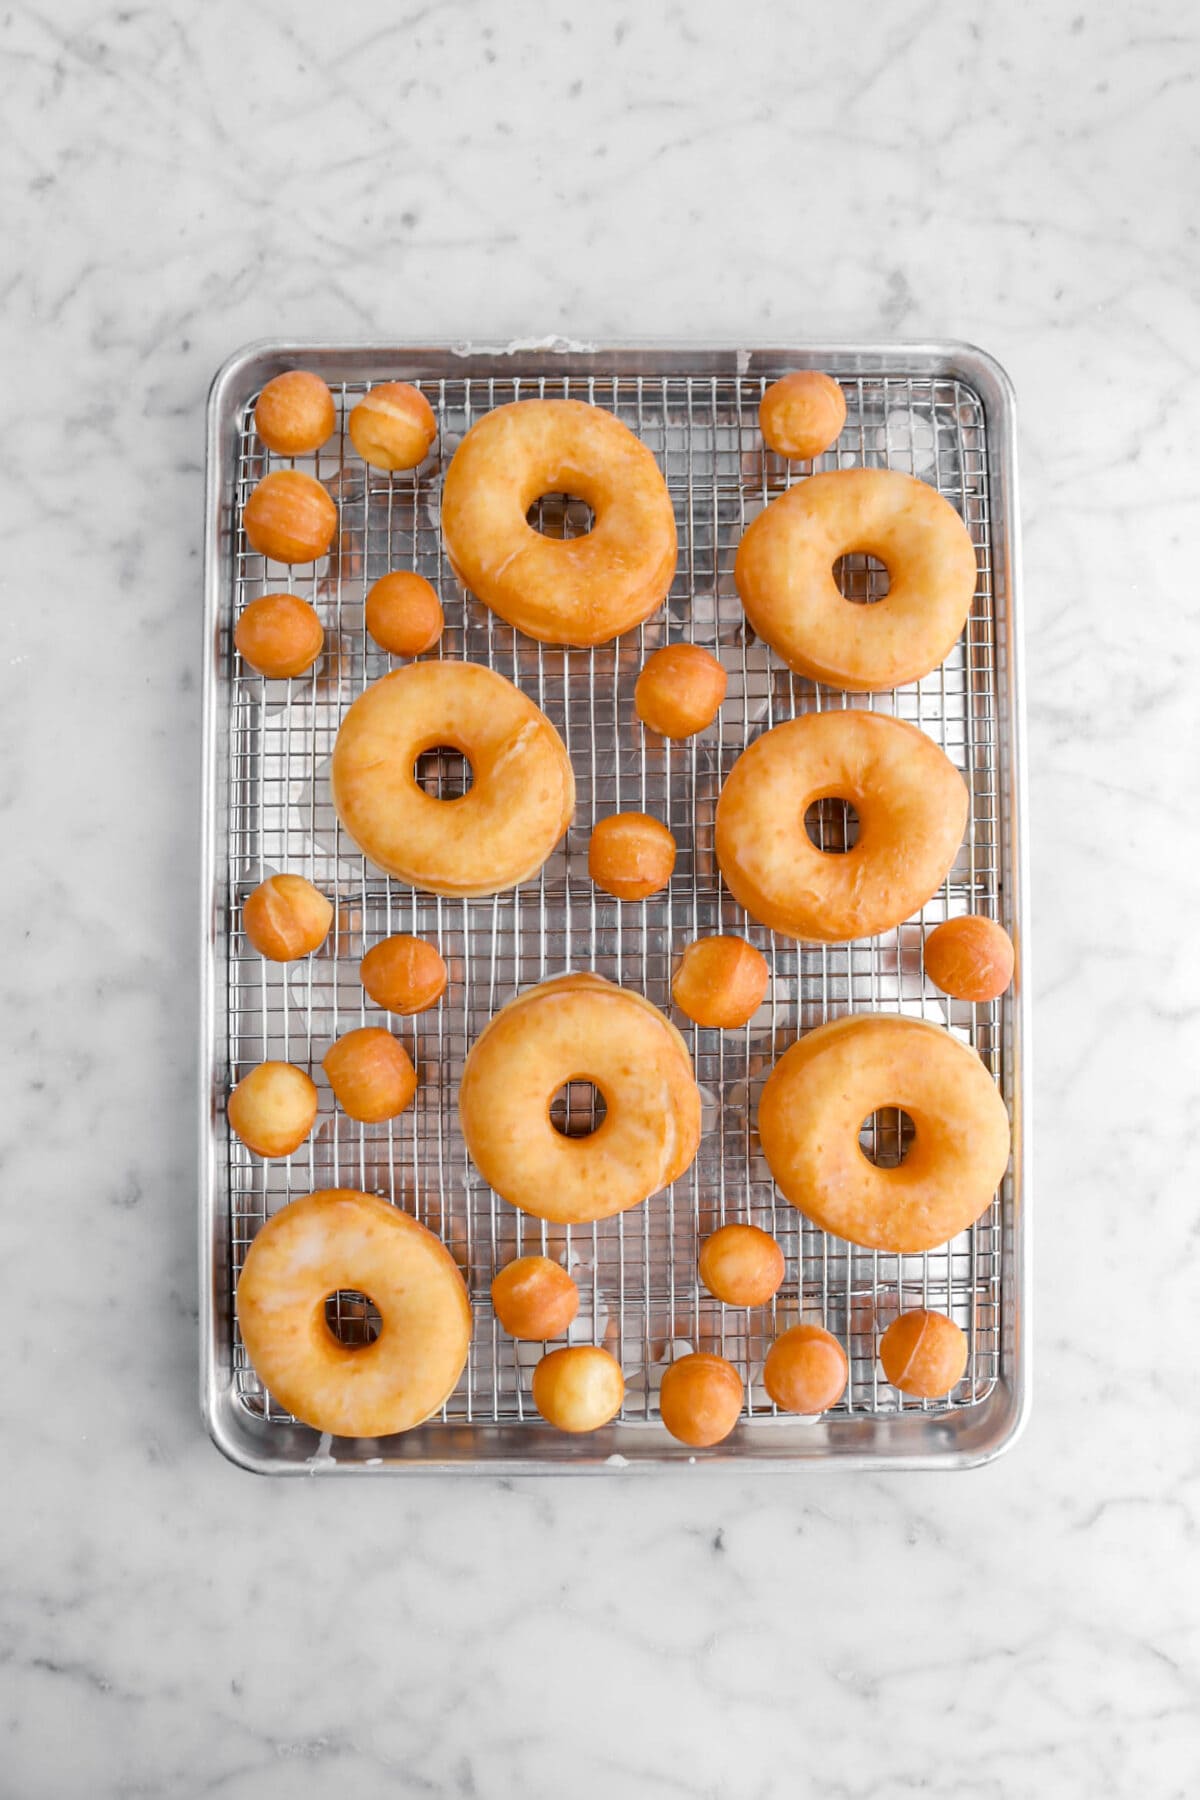 glaze coated doughnuts and doughnut holes on cooling rack in sheet pan.